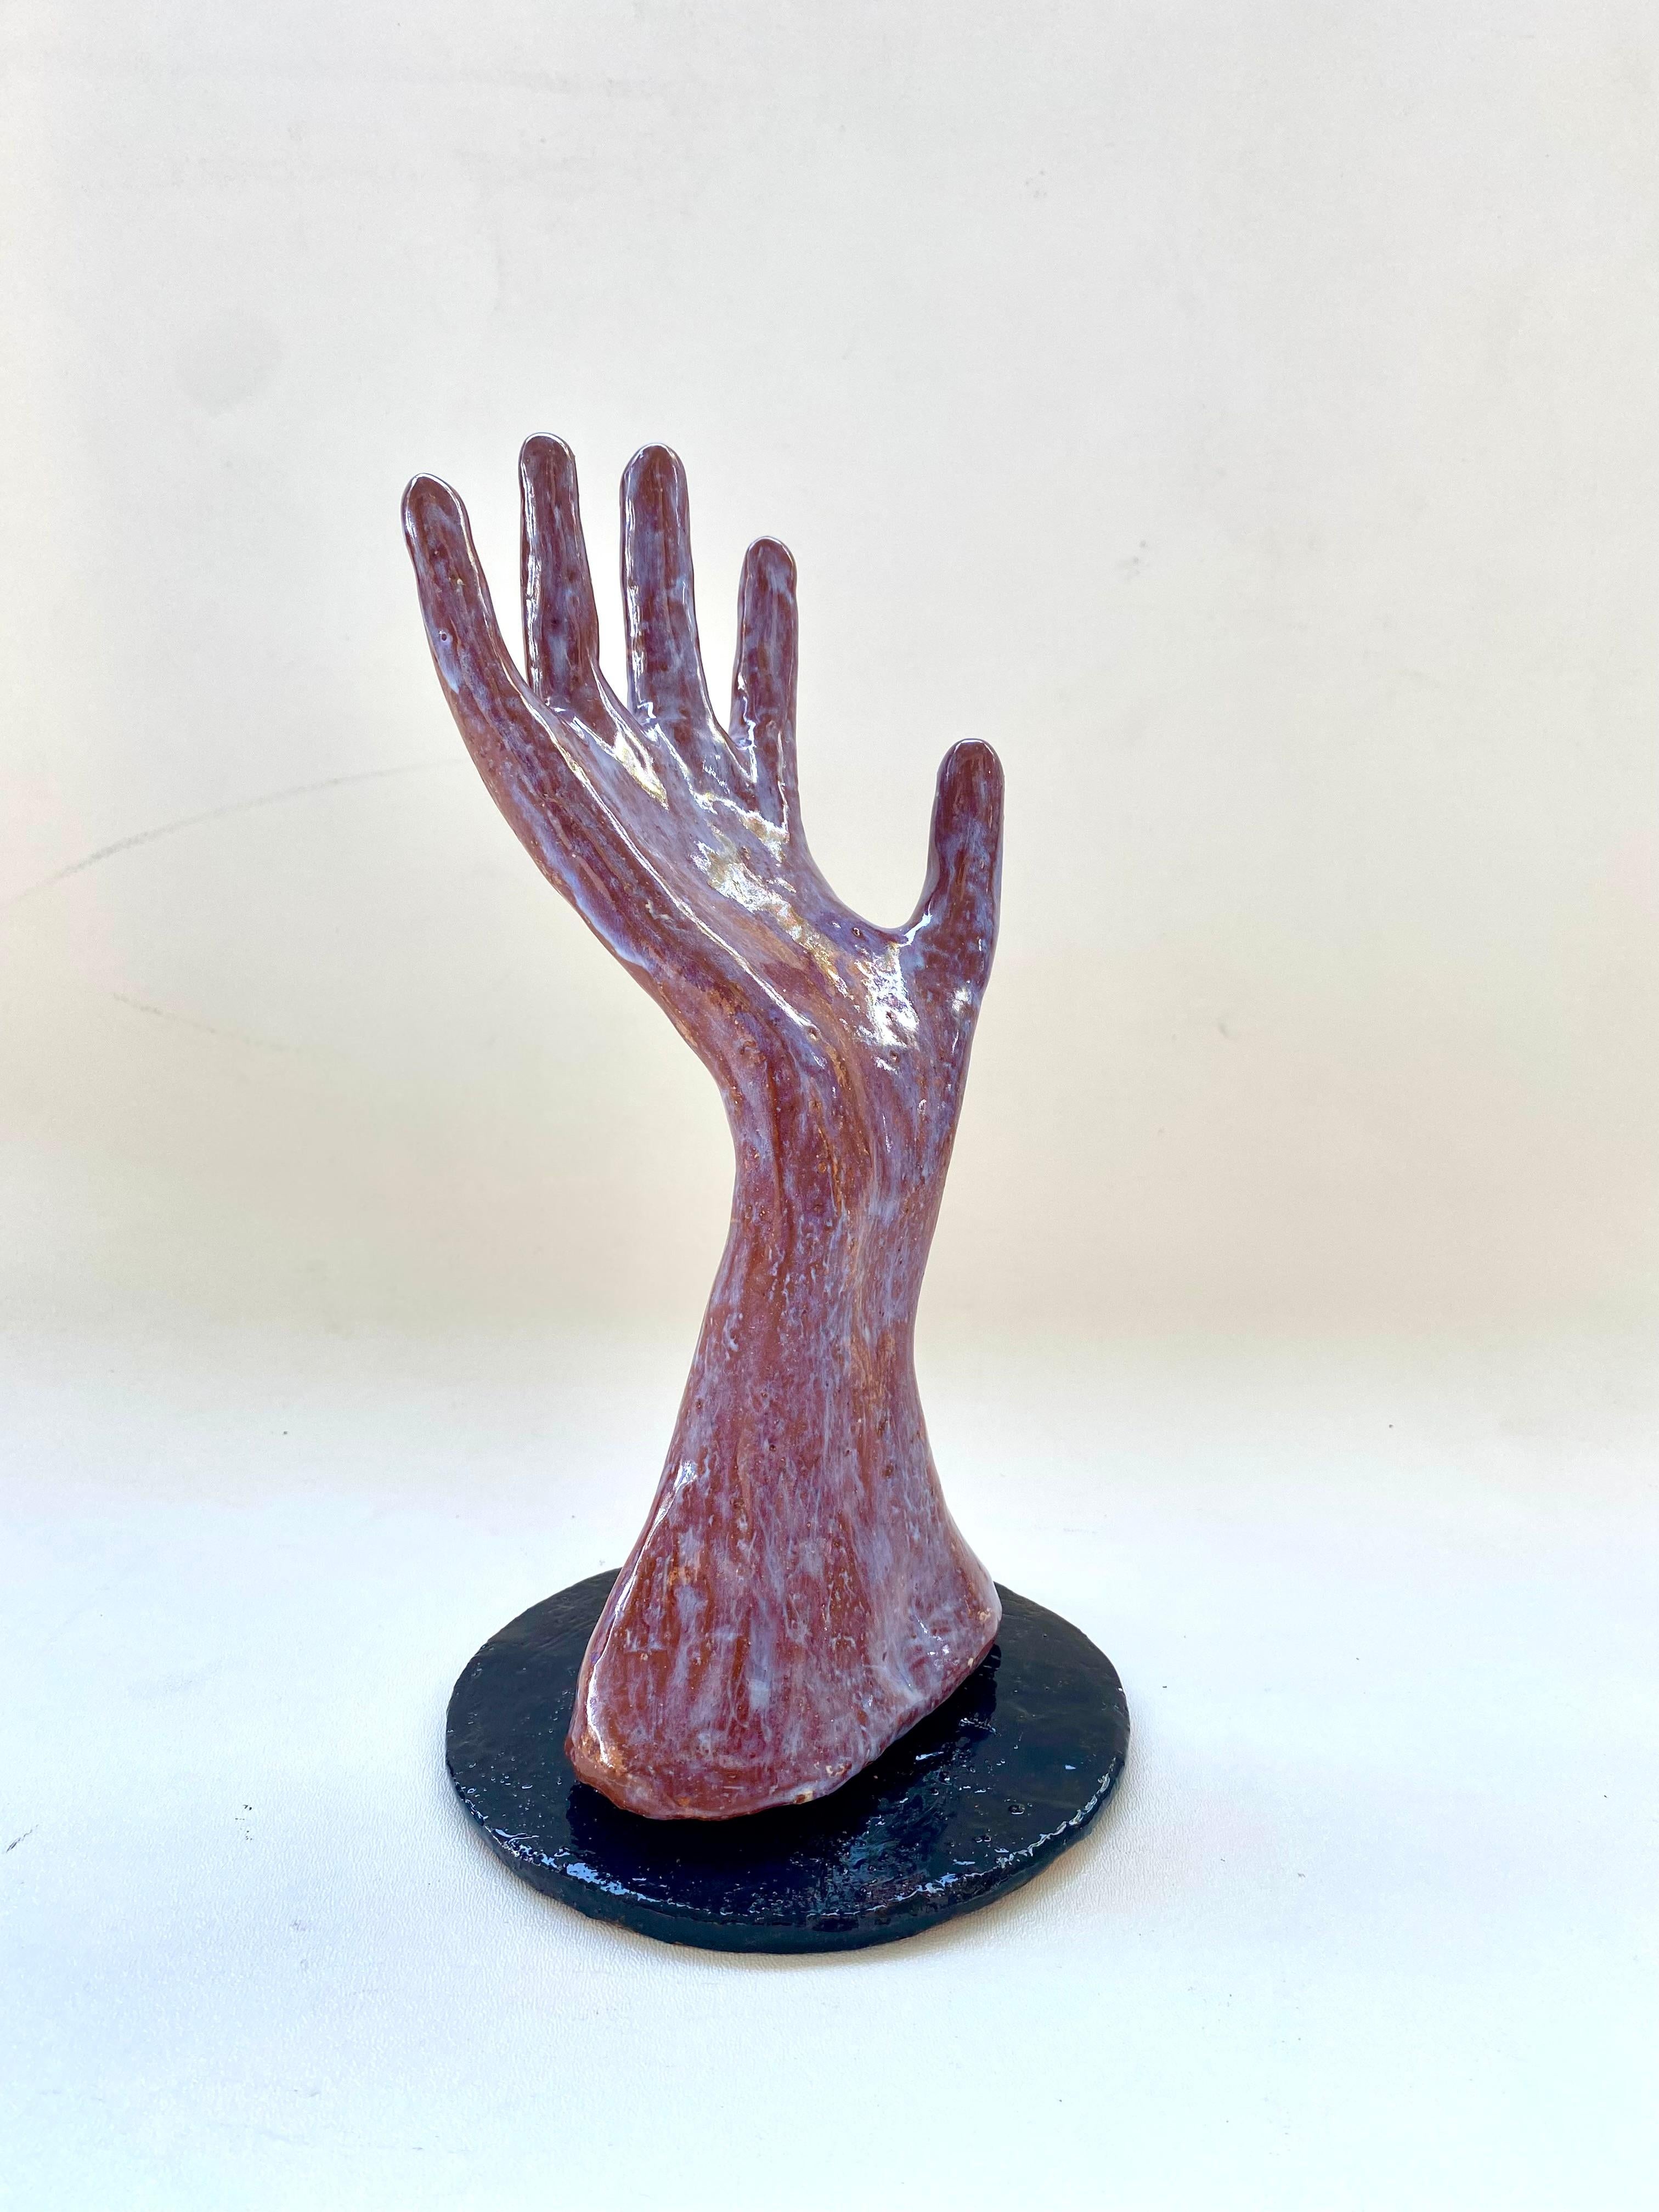 Hand Made Sculptural Glazed Ceramic Hand Jewelry Display Functional Art In New Condition For Sale In Miami, FL